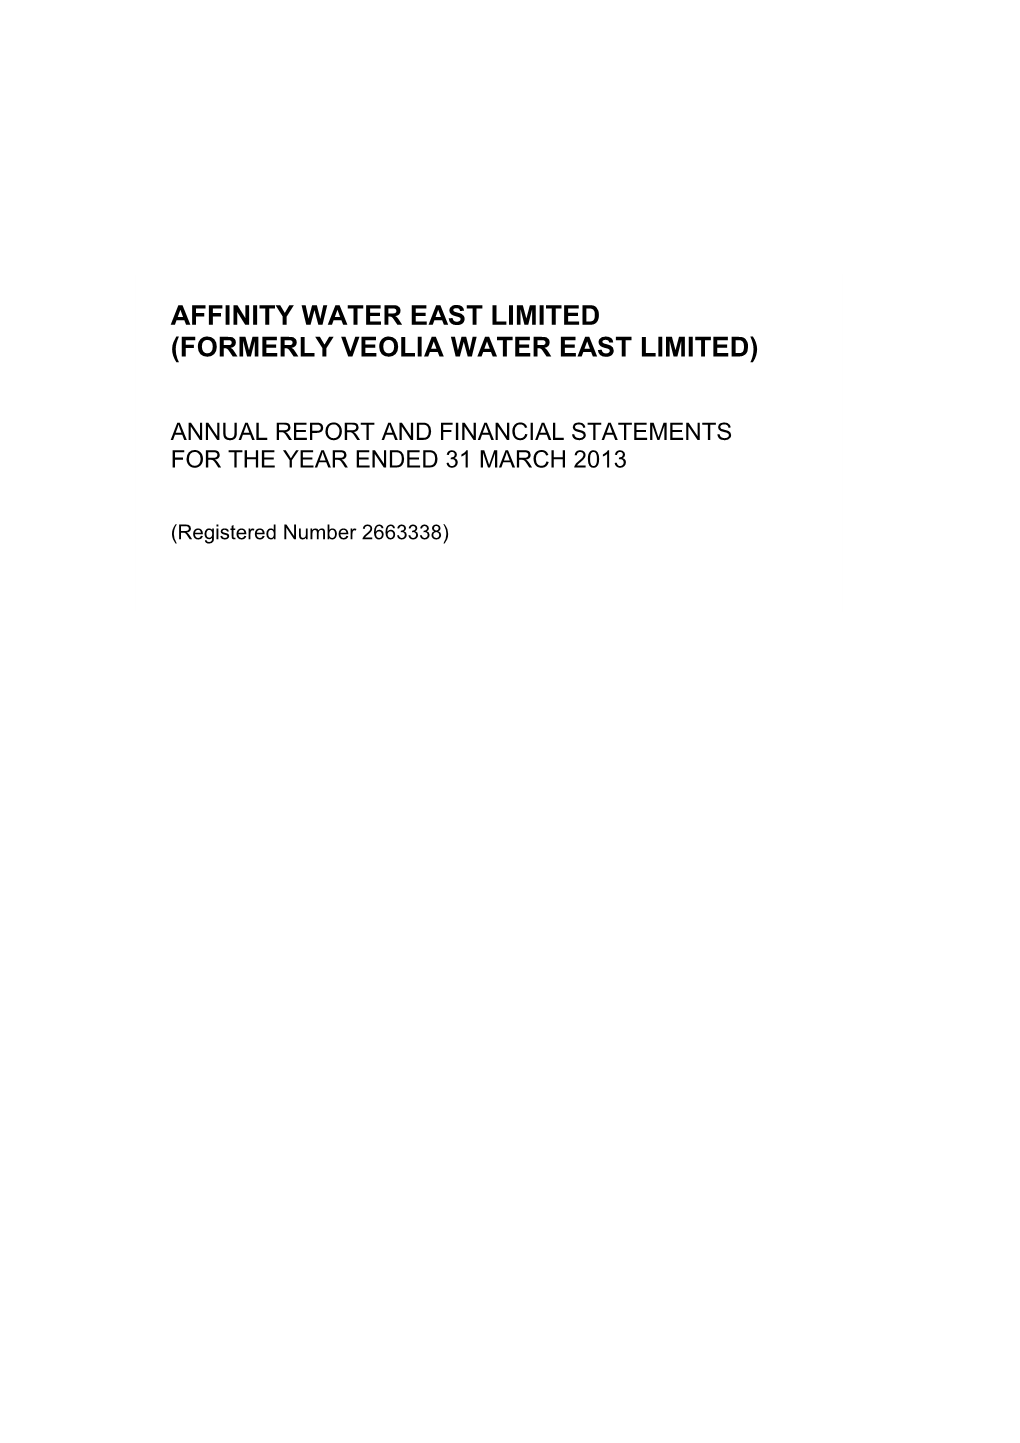 Affinity Water East Limited (Formerly Veolia Water East Limited)